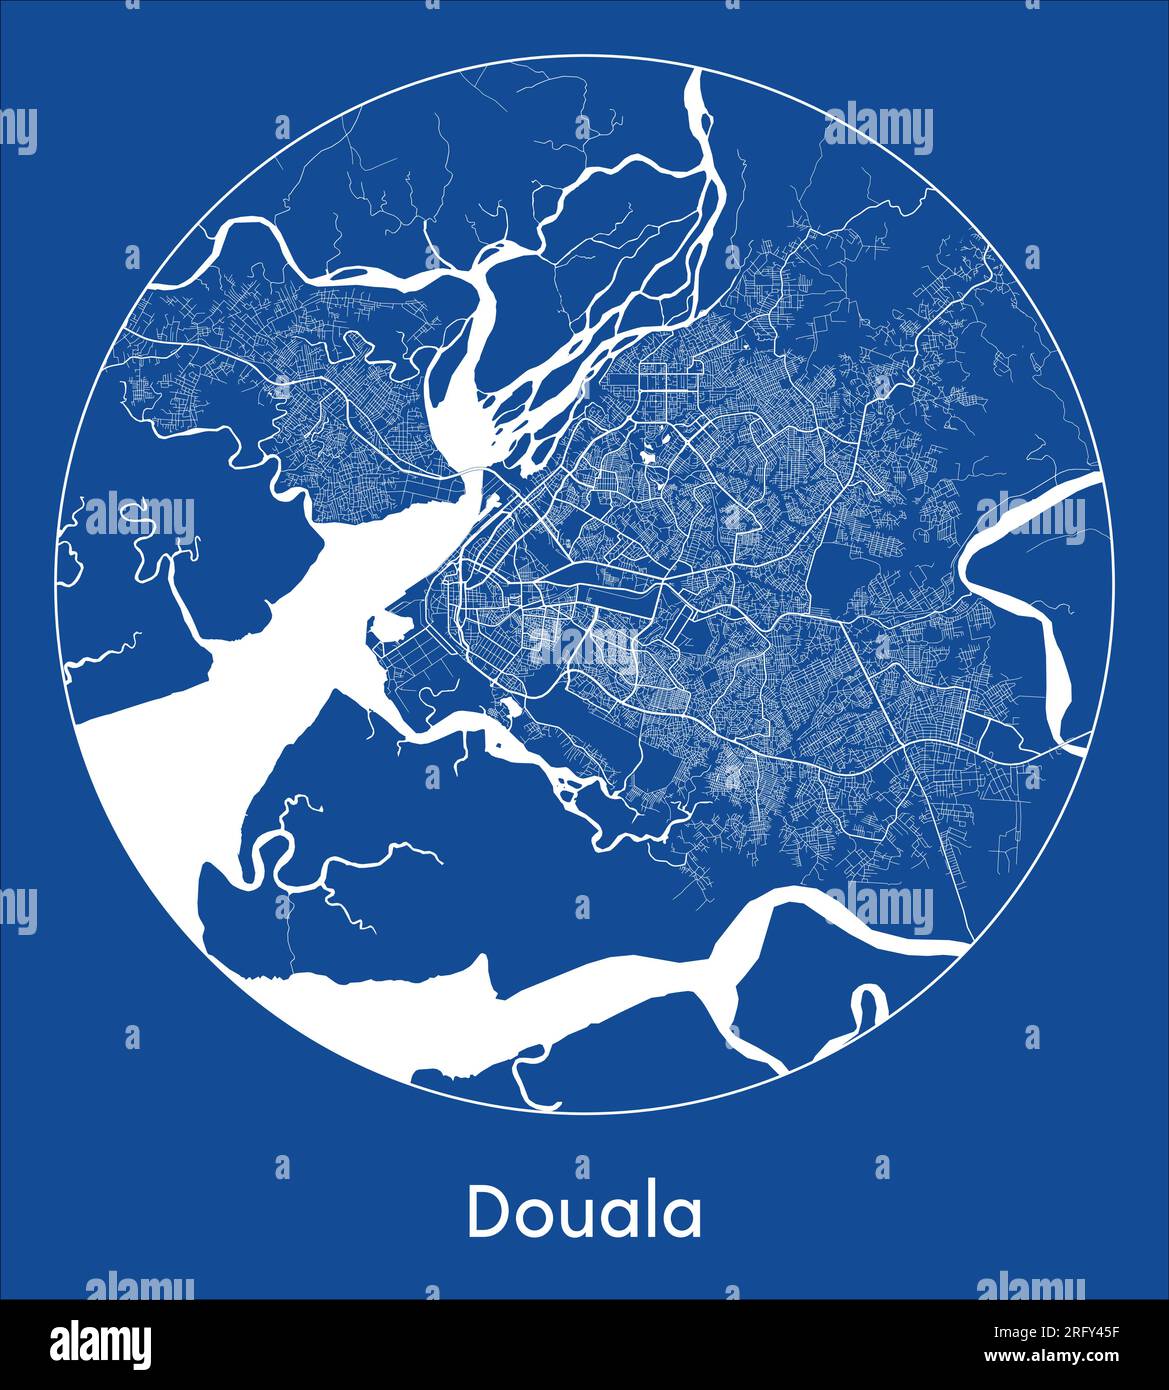 City Map Douala Cameroon Africa blue print round Circle vector illustration Stock Vector